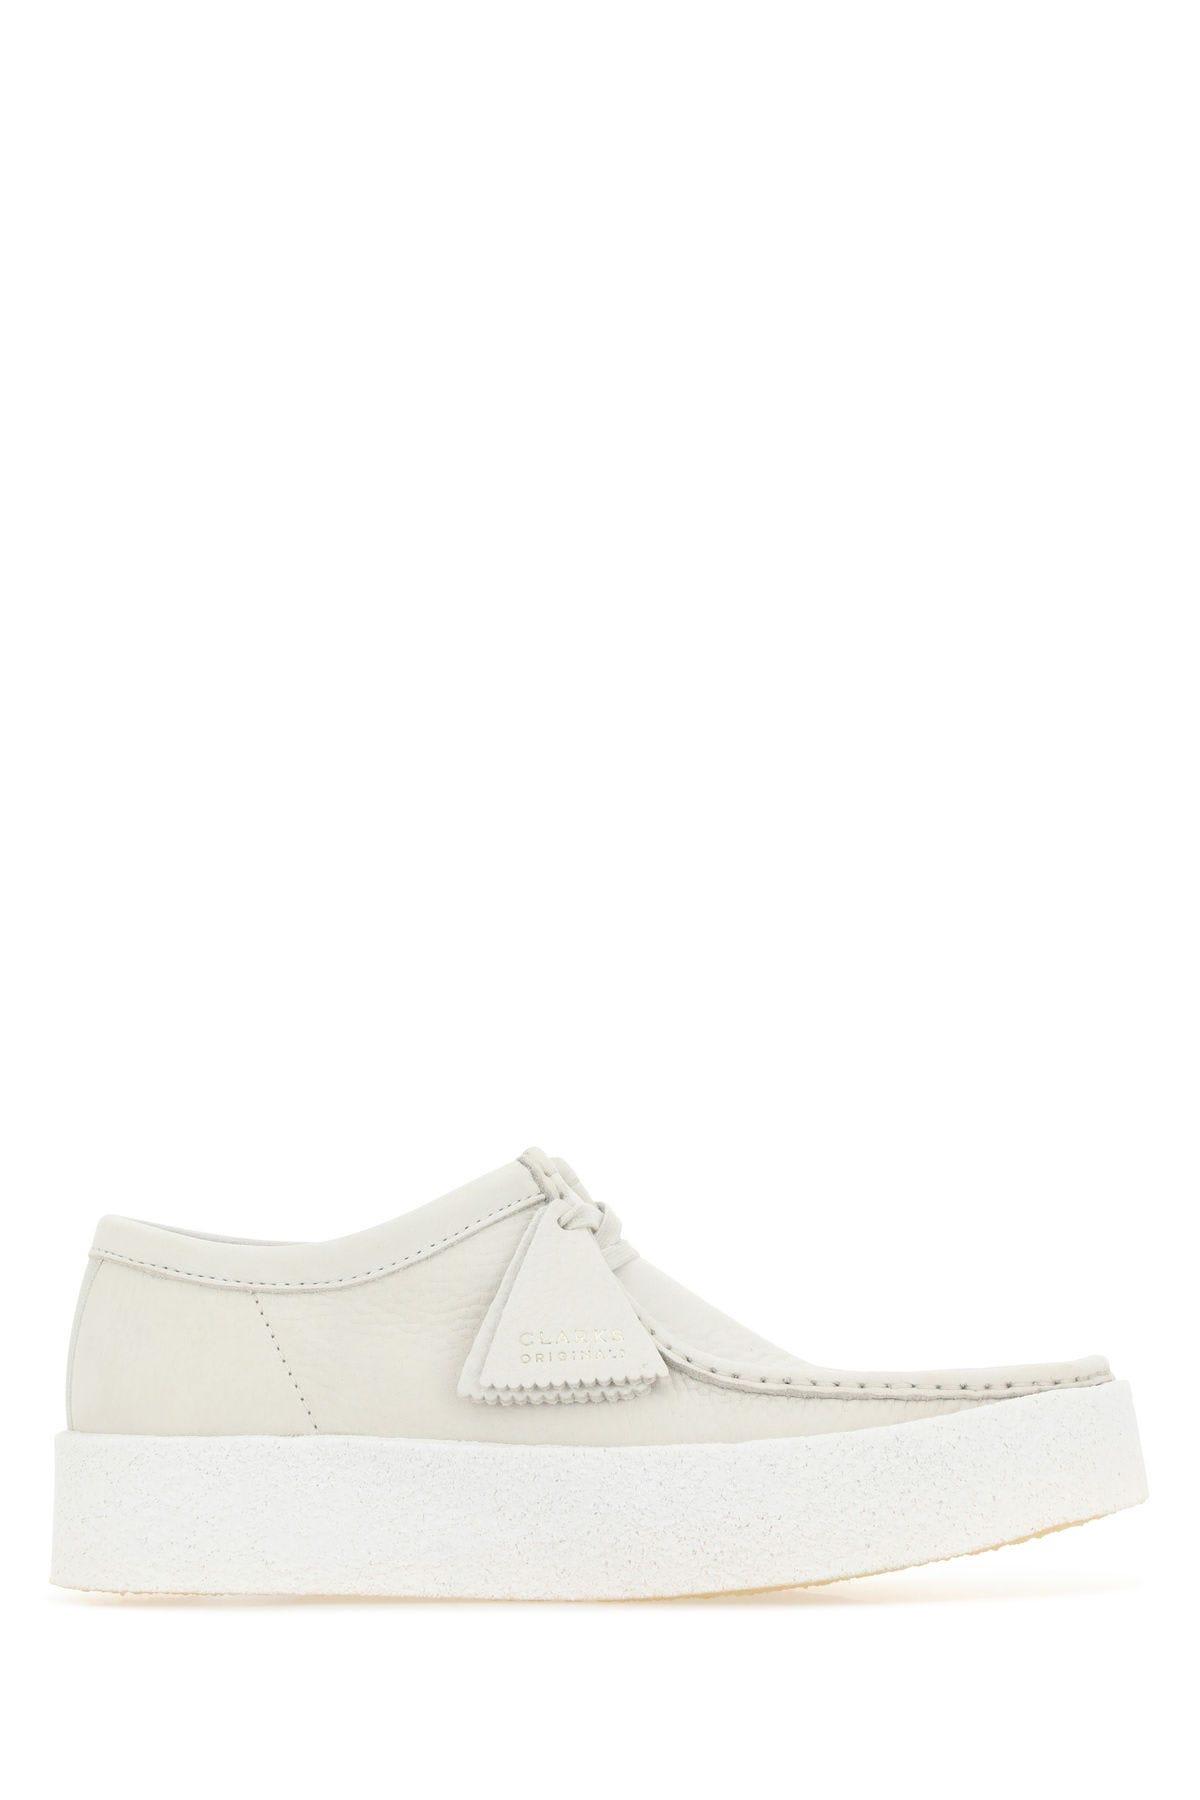 Clarks Sand Nubuck Wallabee Ankle Boots In White Nubuck